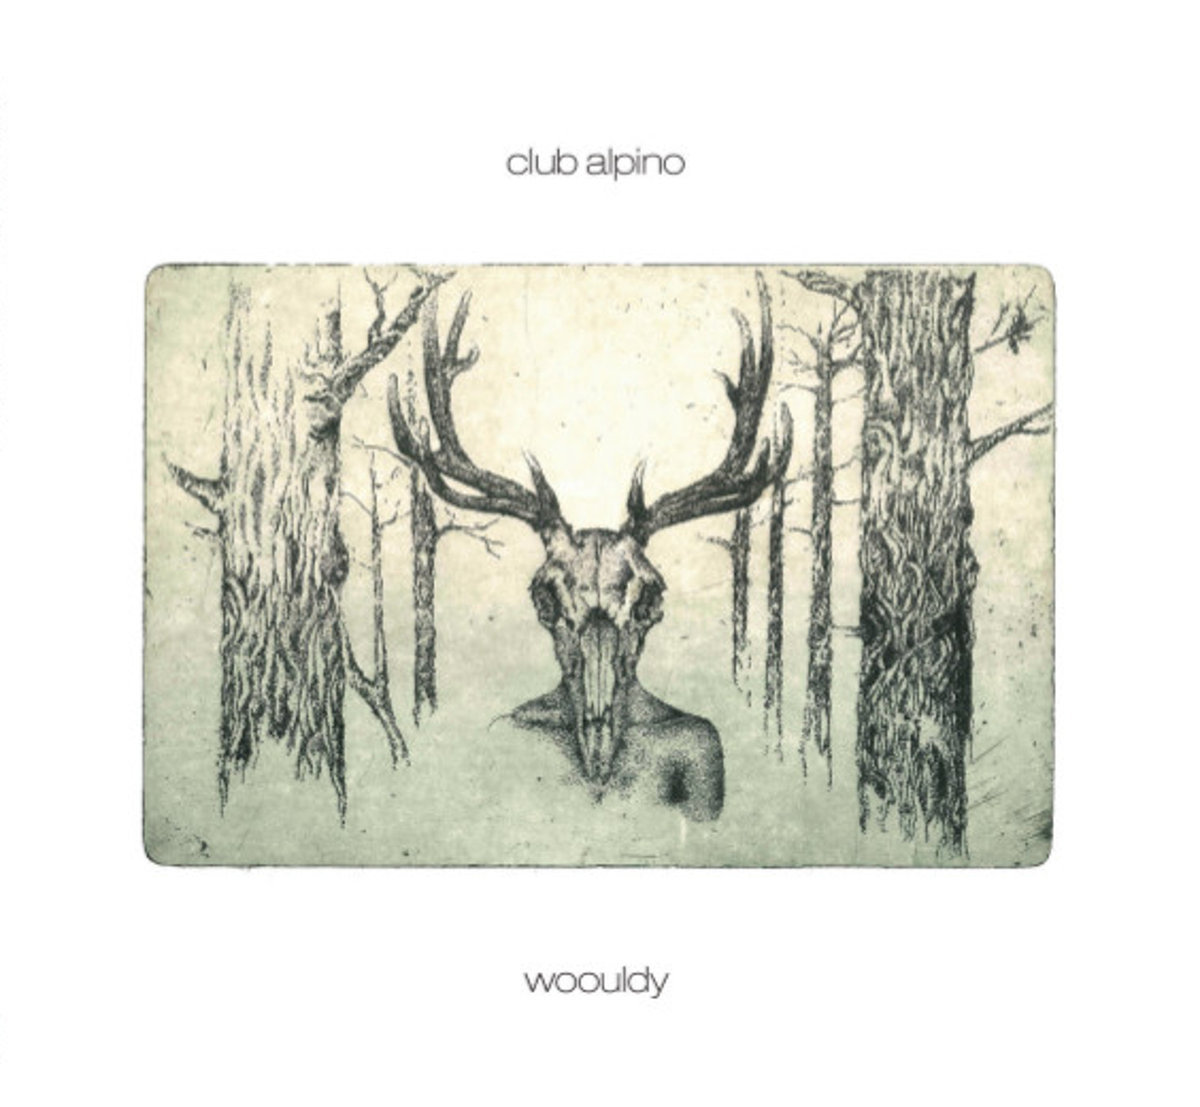 Bandcamp pick of the week: Club Alpino - Woouldy